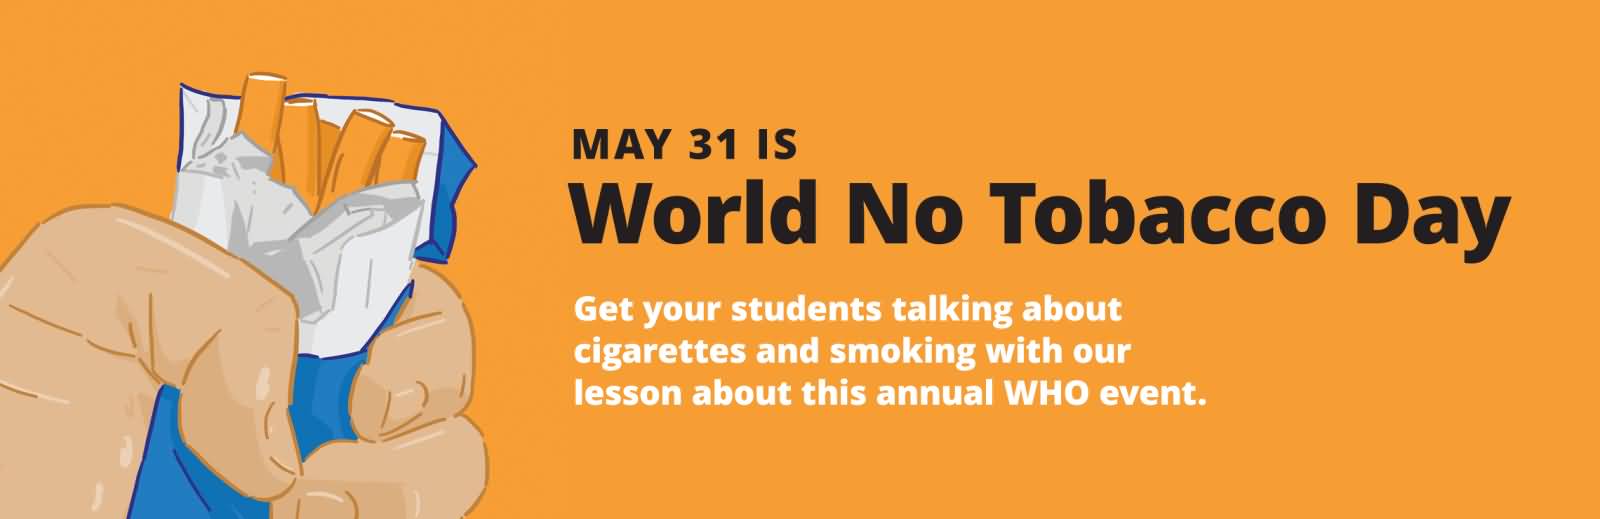 May 31 Is World No Tobacco Day Get Your Students Talking About Cigarettes And Smoking With Our Lesson About This Annual WHO Event